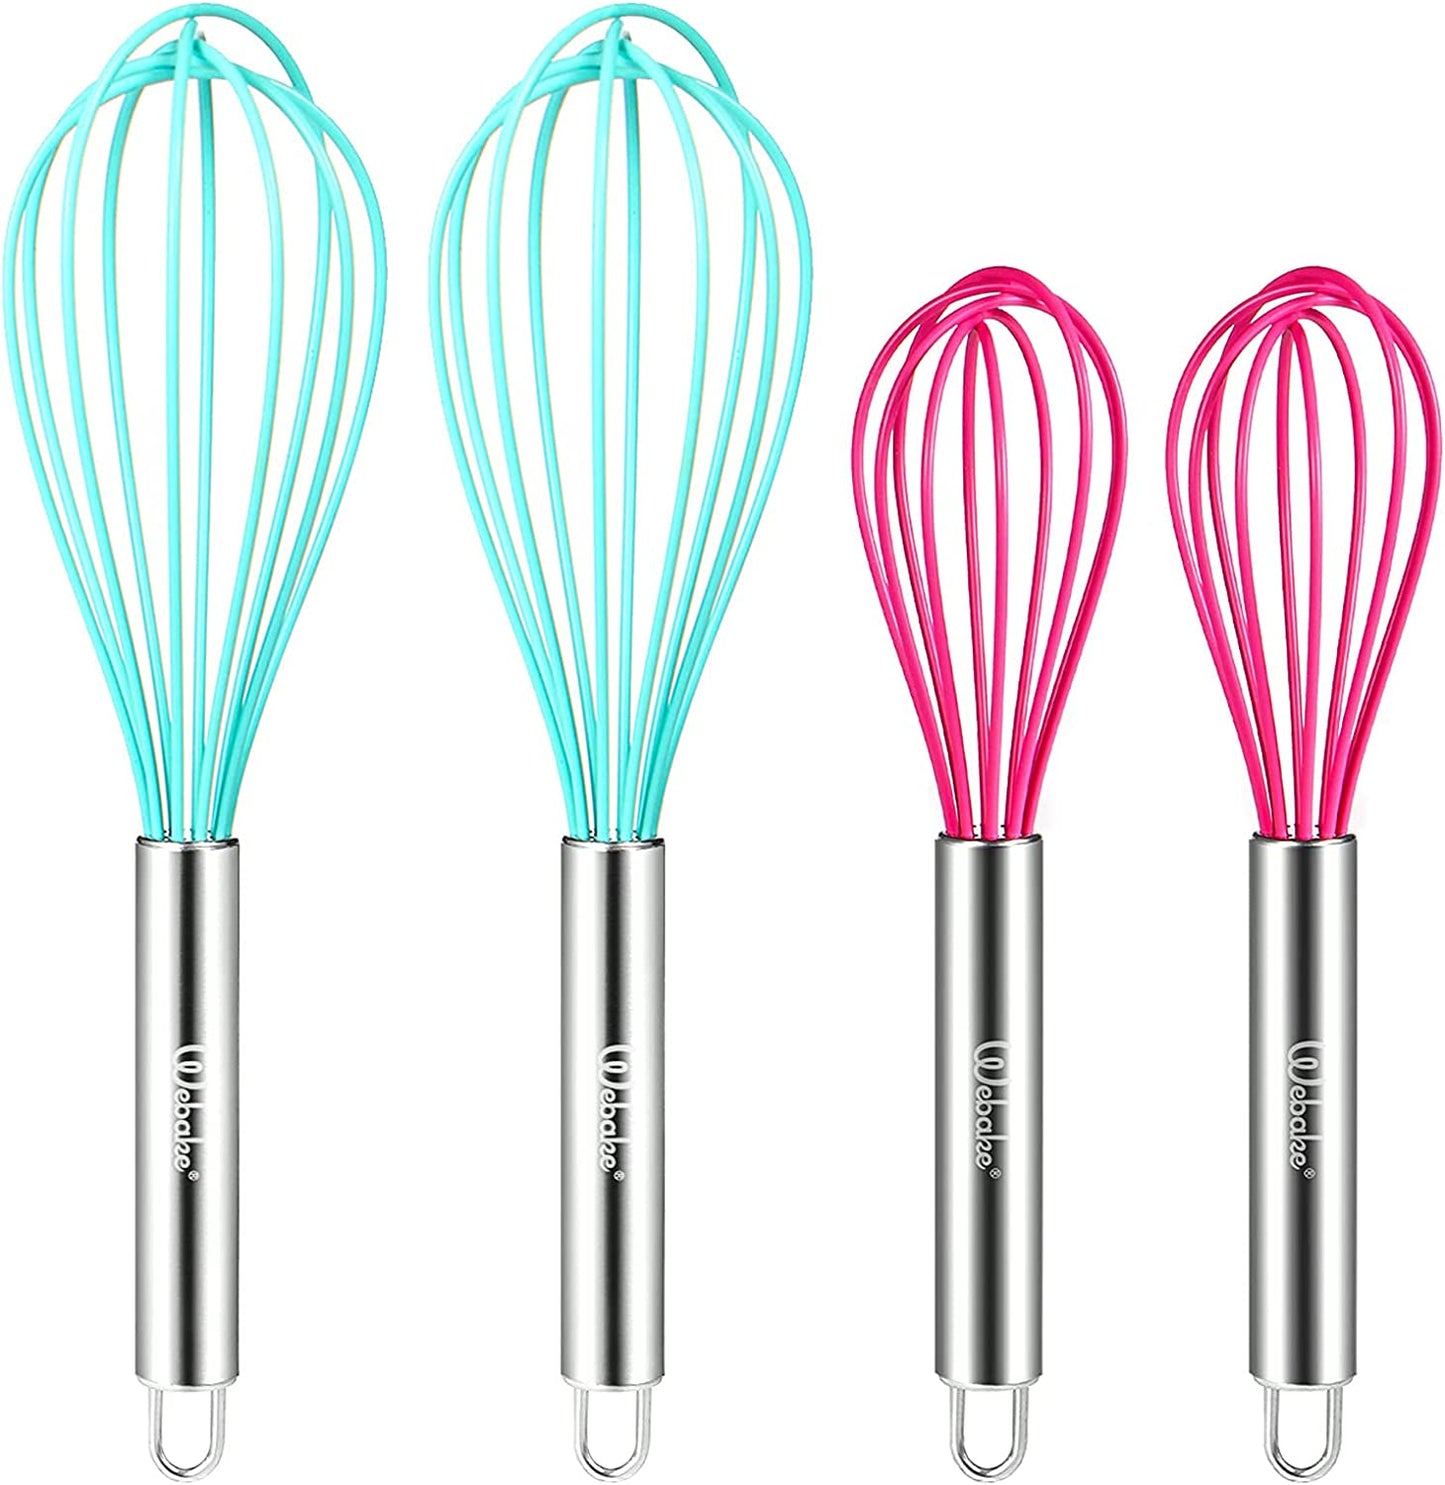 Webake Wooden Handle Non-Stick Silicone Cooking Balloon Whisk (9.37x2.44)